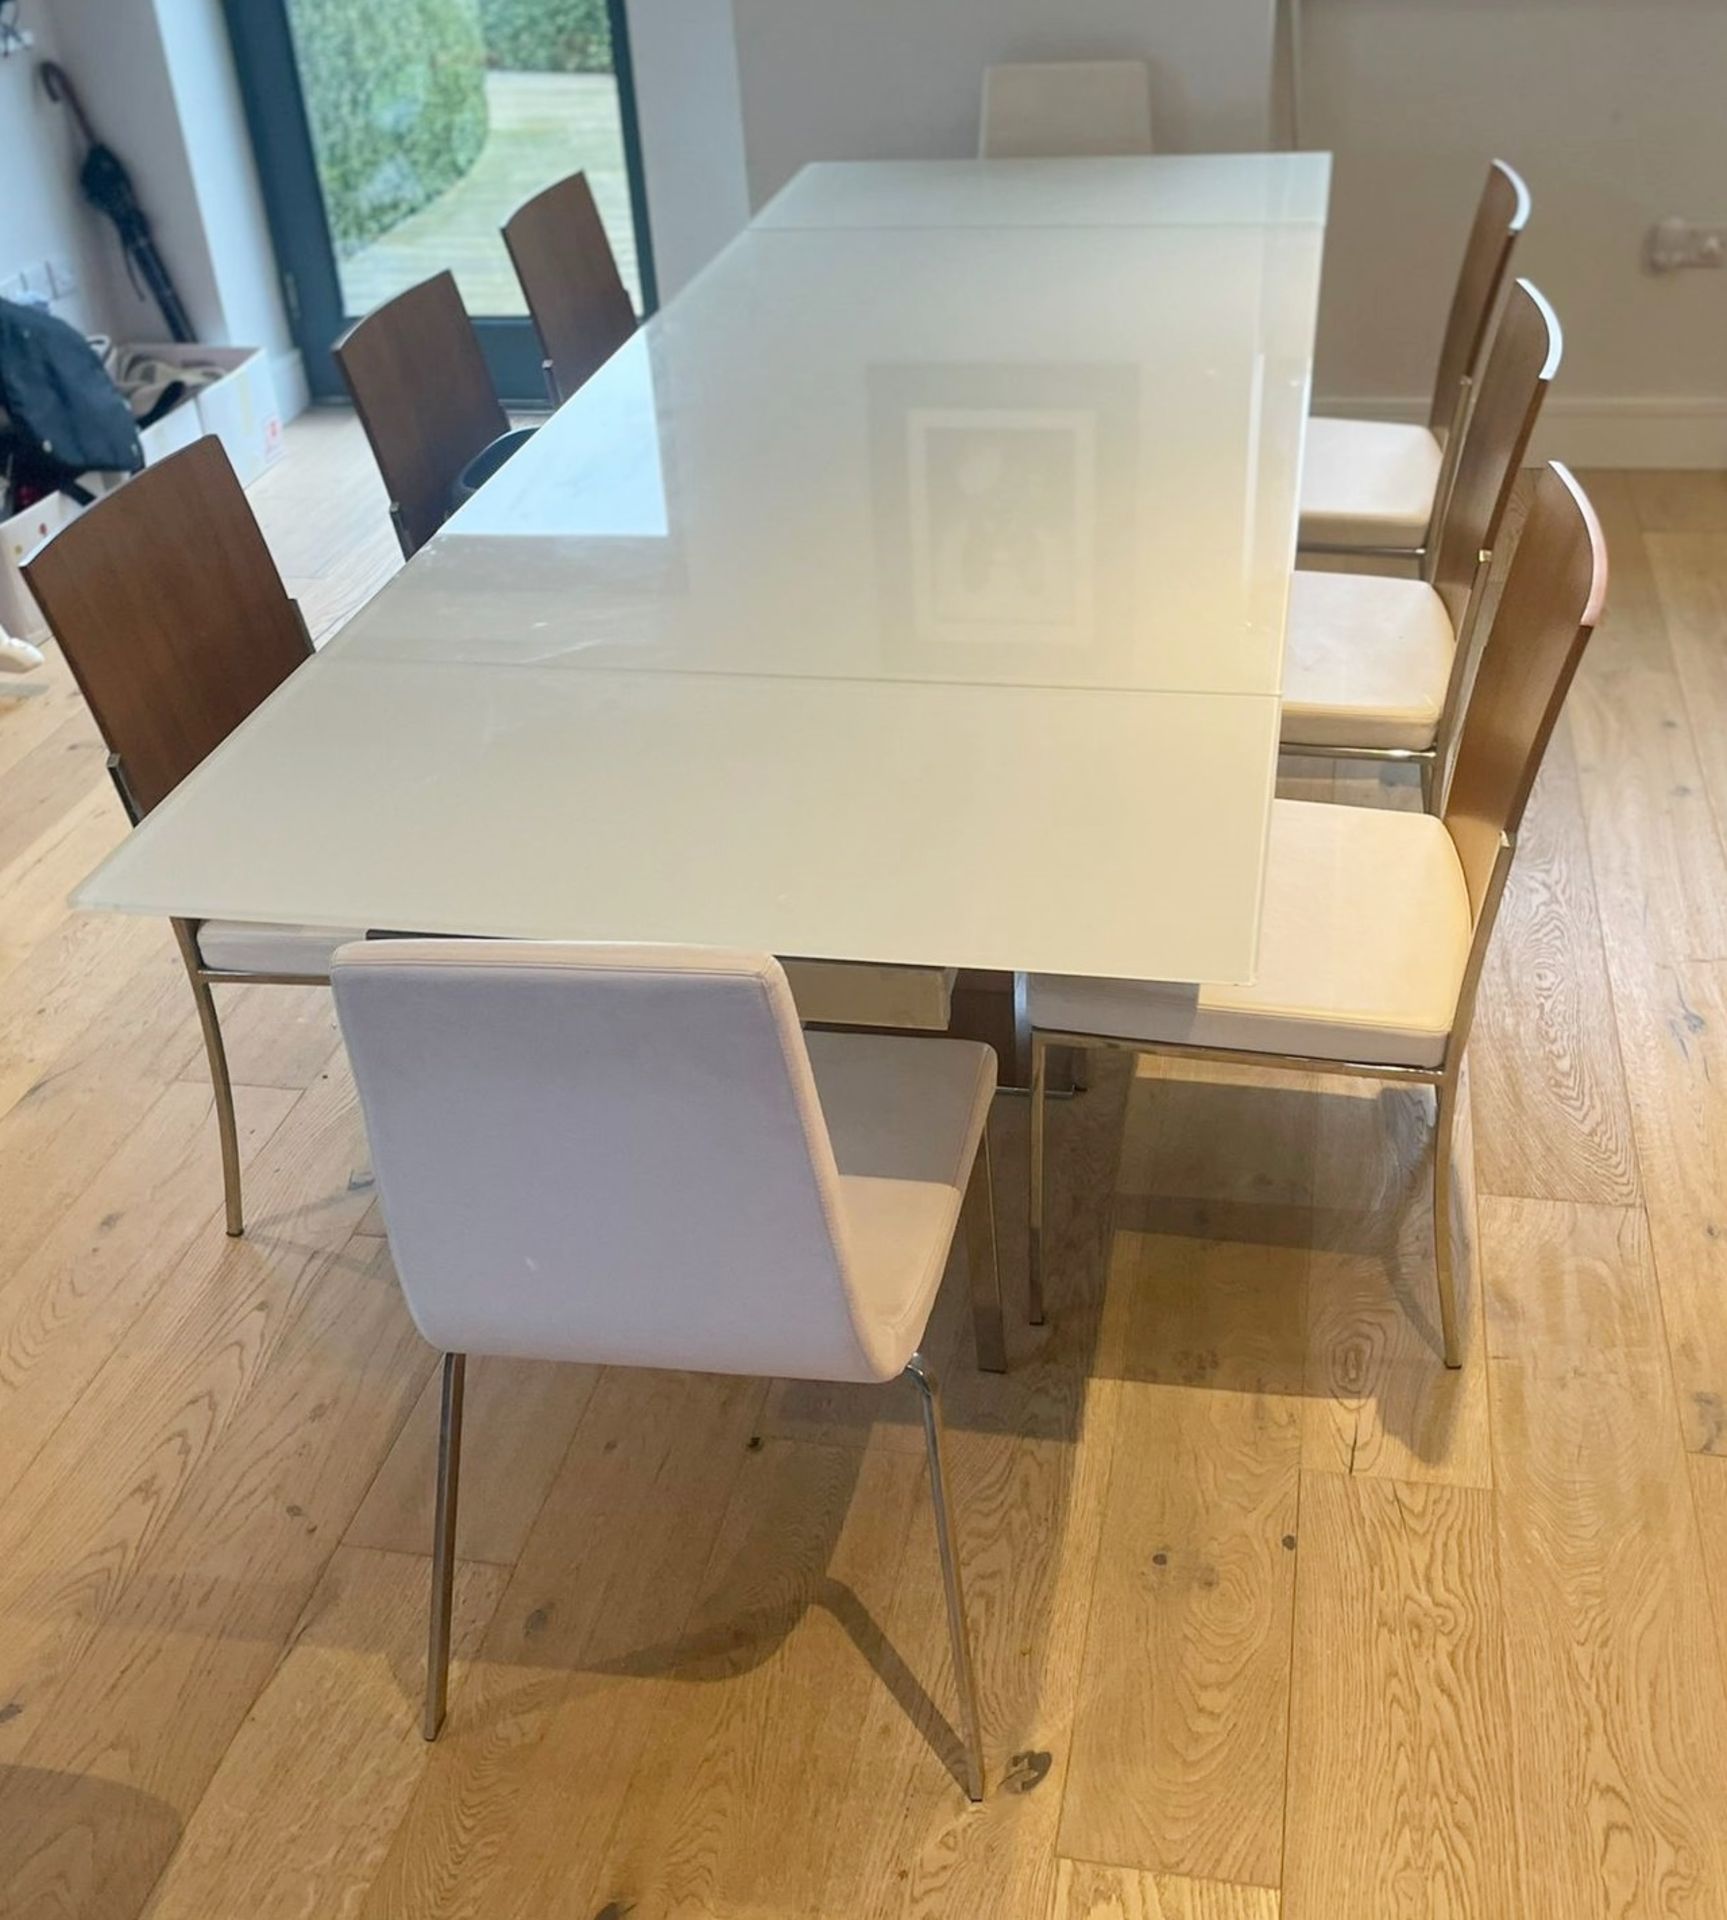 1 x CALLIGARIS 2.8 Metre Italian Glass-topped Extending Dining Table With 8 x Calligaris Chairs - Image 2 of 8